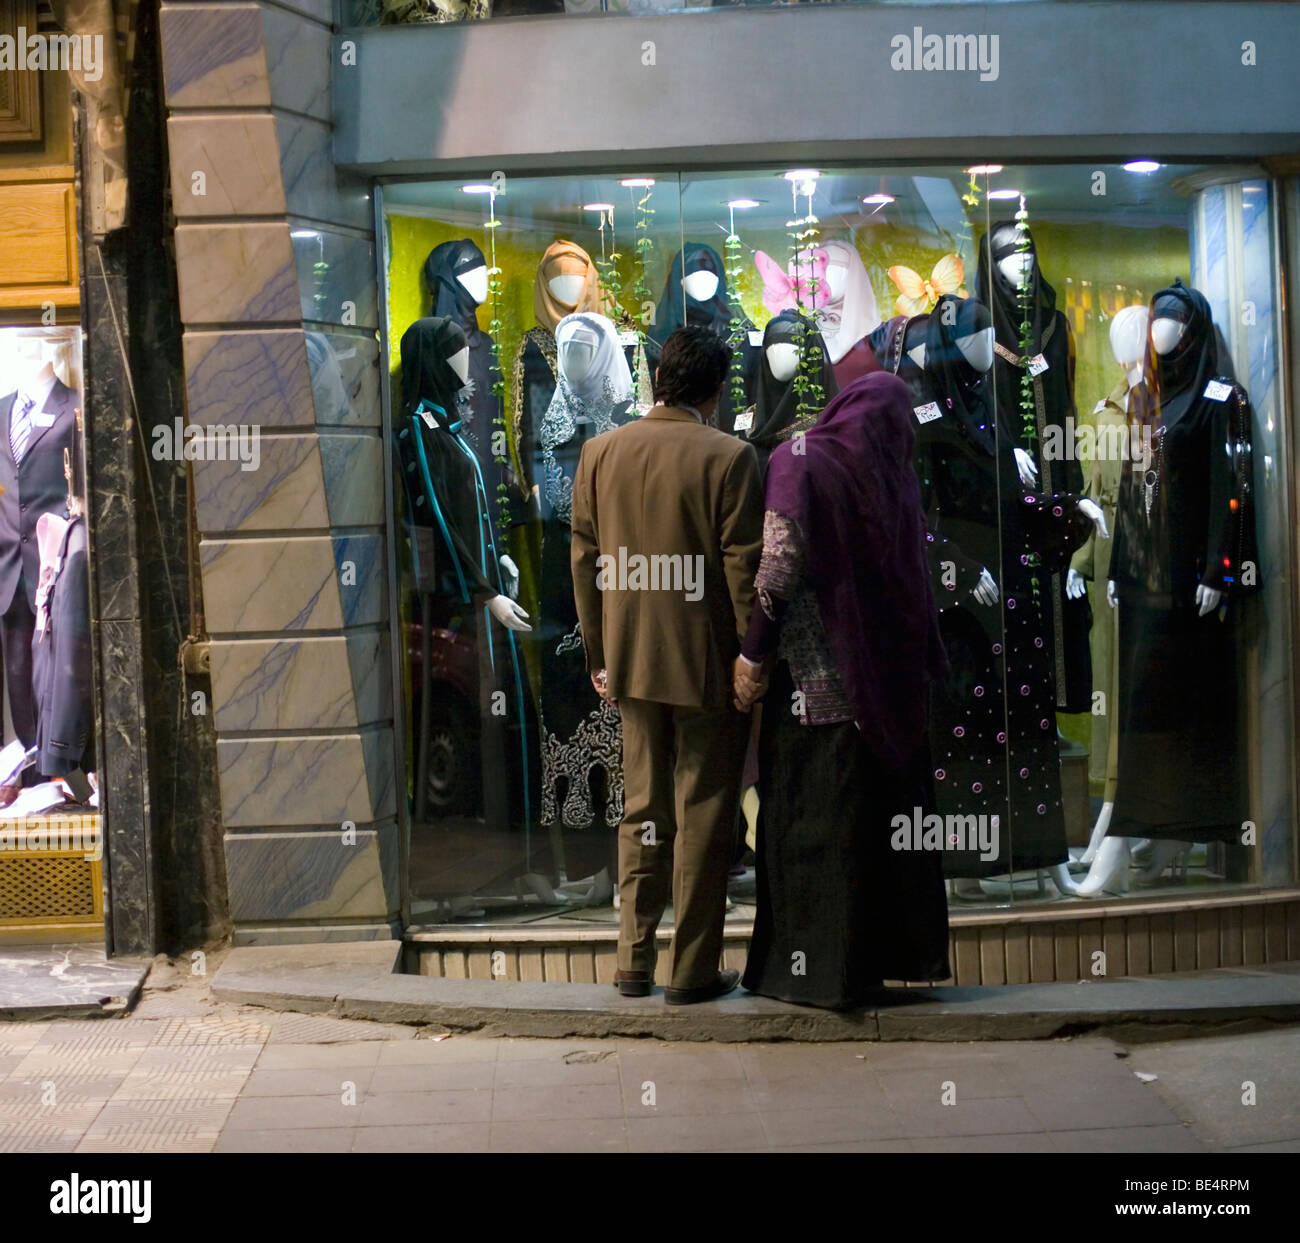 A couple window shopping in Cairo Stock Photo